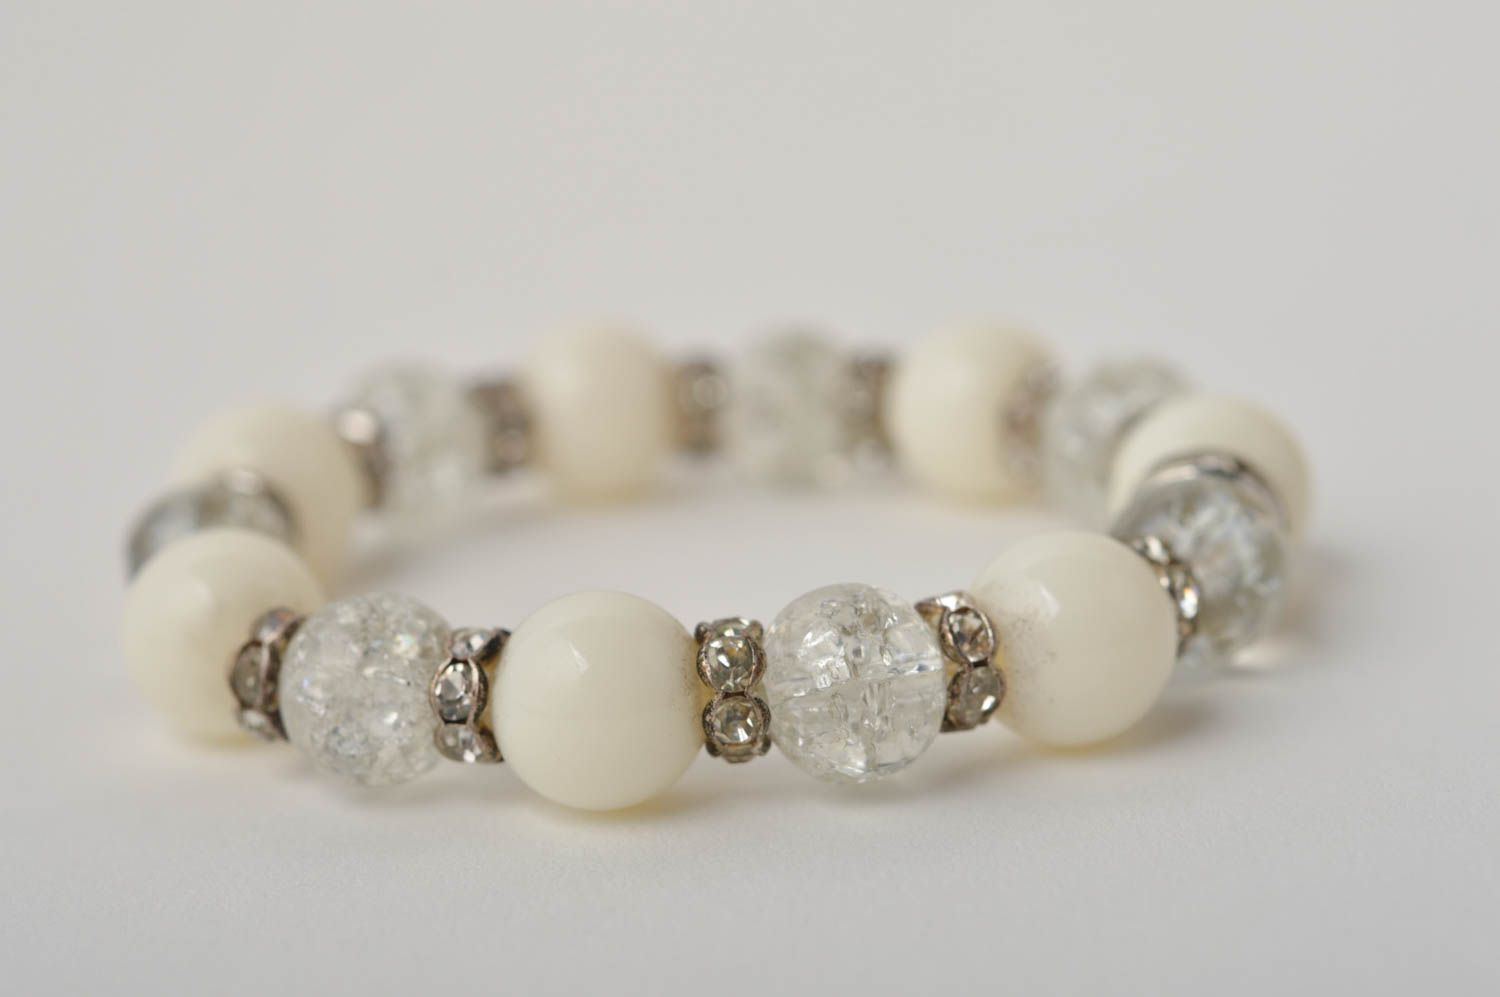 Stretchy white and silver beads bracelet for girls photo 5